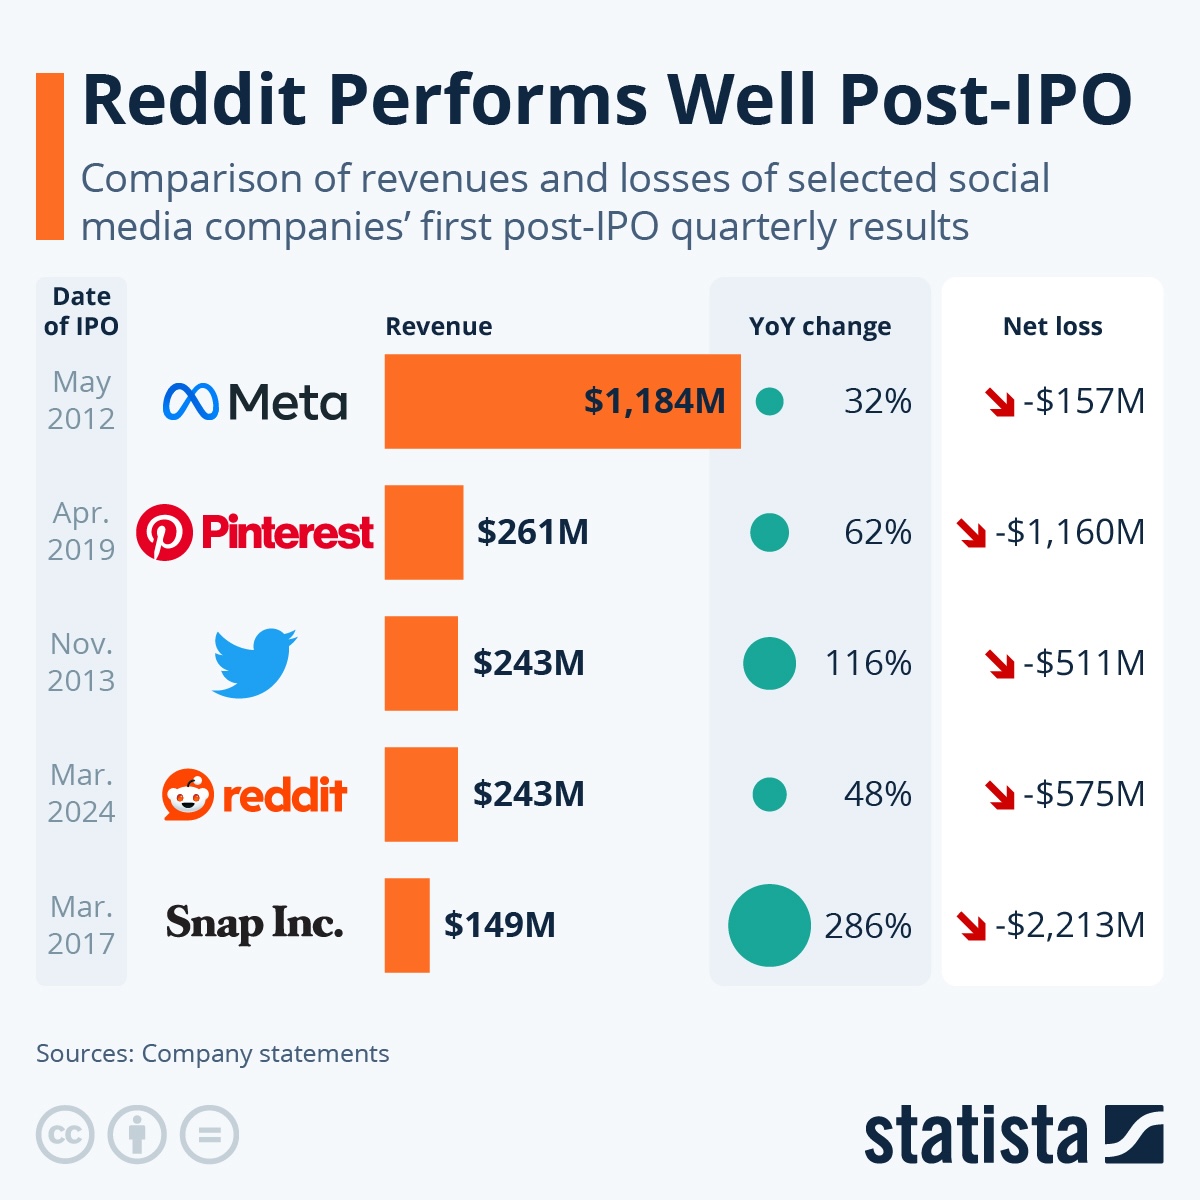 Reddit Increases User Base and Revenue Year Over Year in First Quarter After Going Public